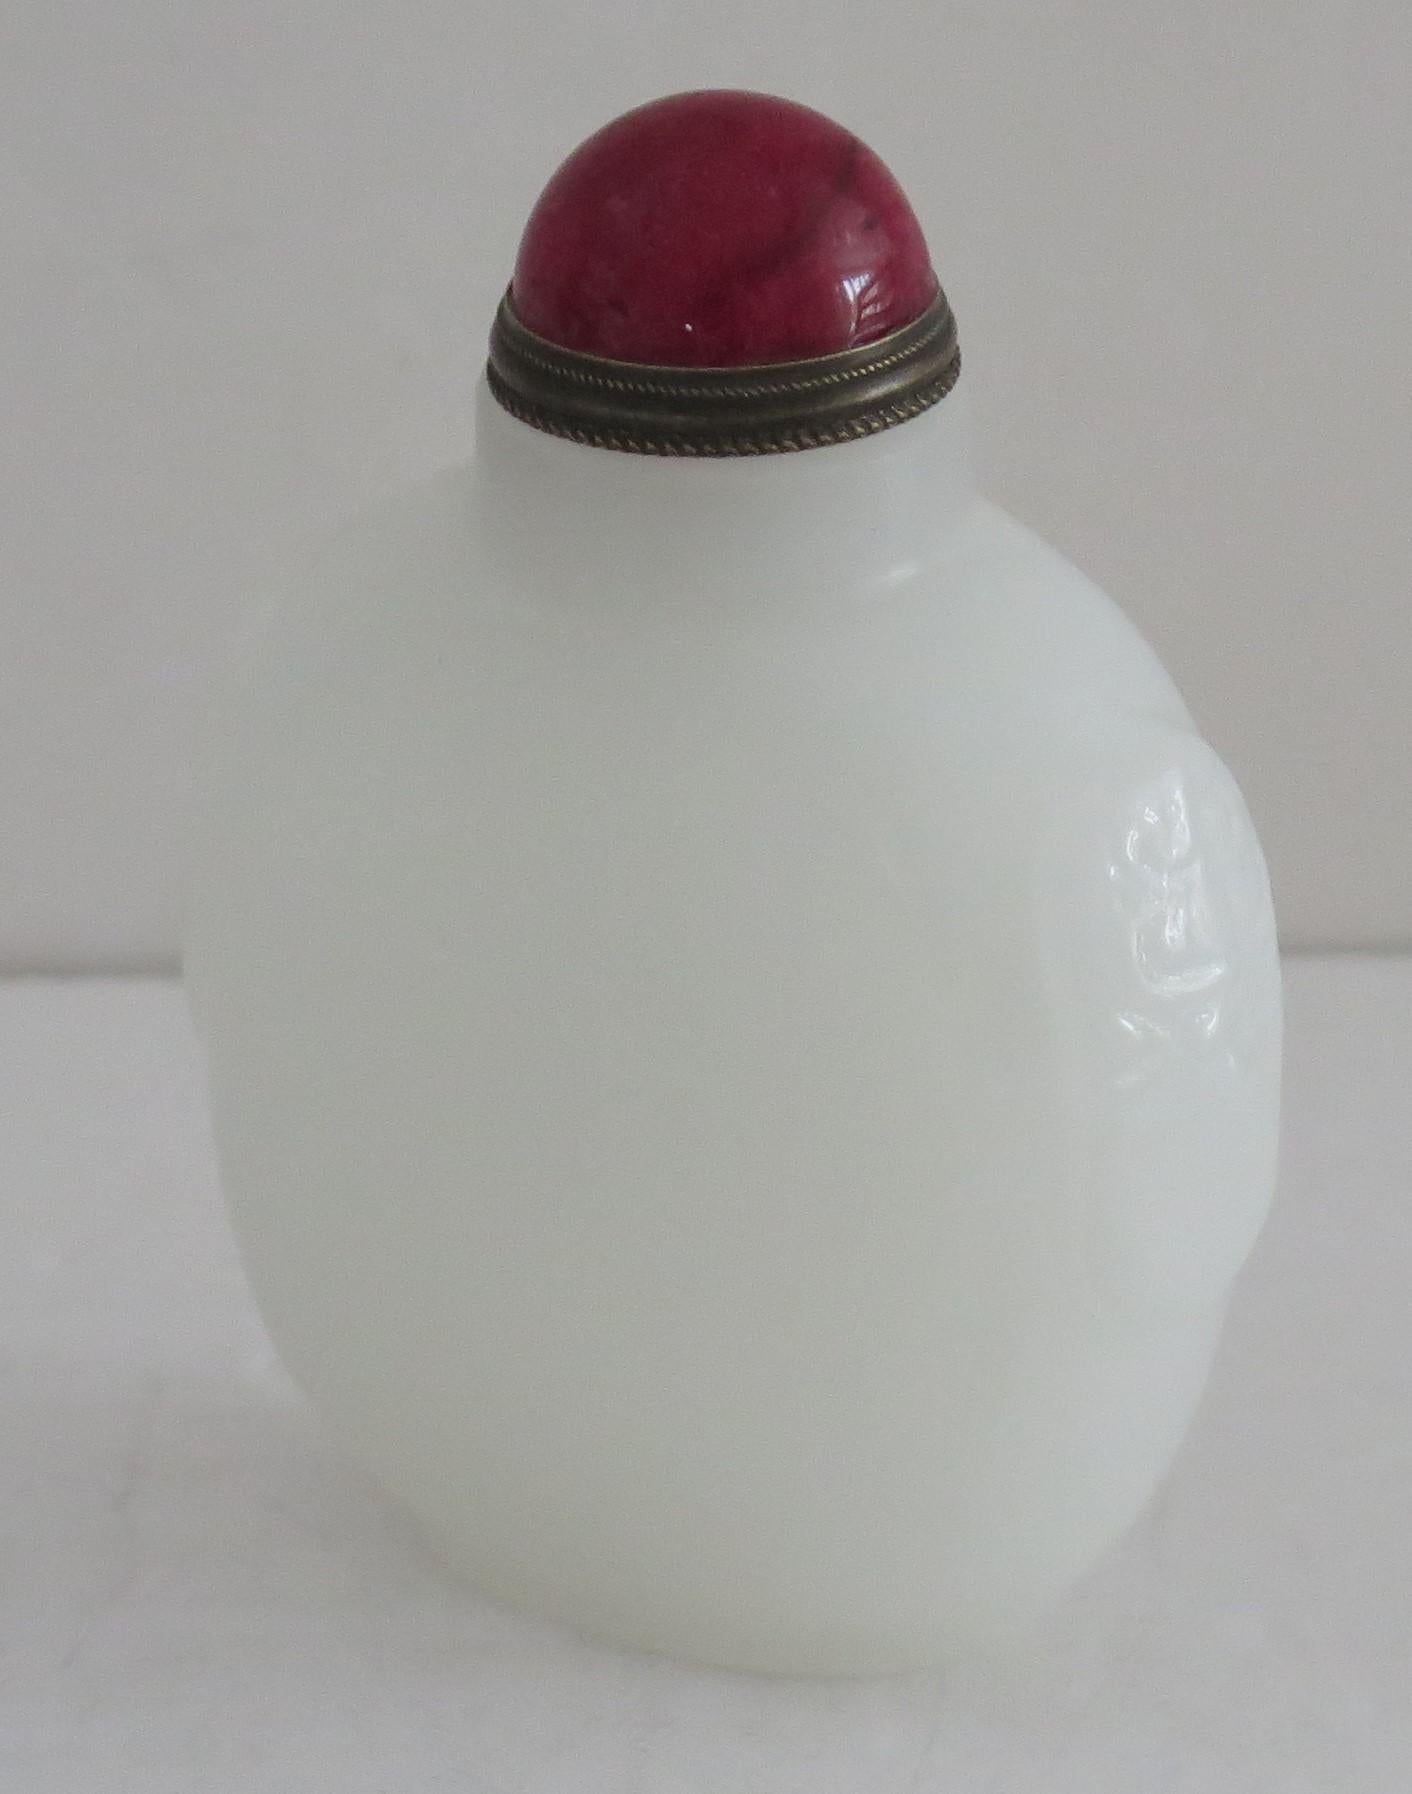 This is a beautiful Chinese snuff bottle, made of a white stone with a red stone top and spoon, dating to the mid 20th century.

The bottle is hand carved and polished from a type of stone having a lovely milky white colour with hand-carved detail